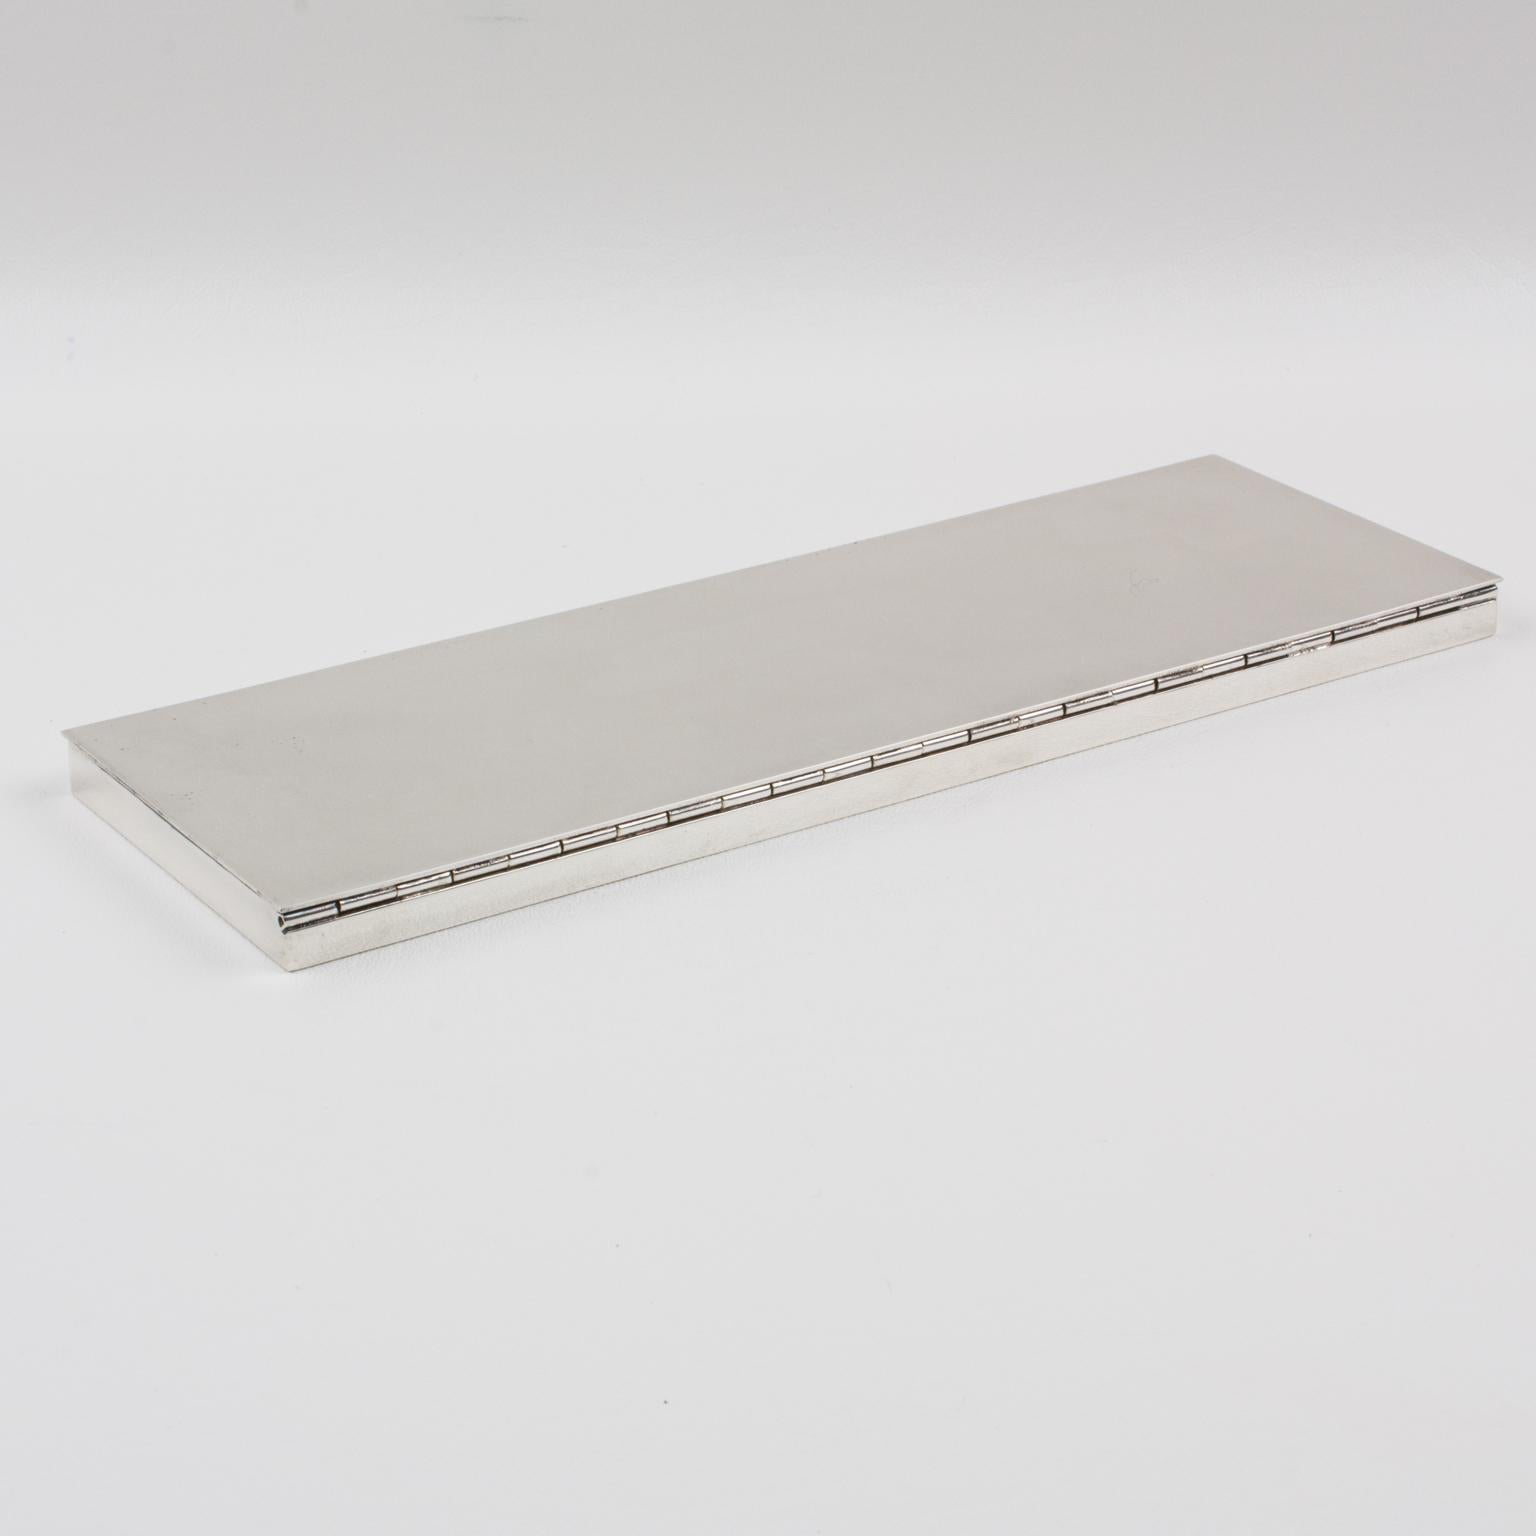 Mid-20th Century Modernist Extra Long and Flat Silver Plate Box, 1960s For Sale